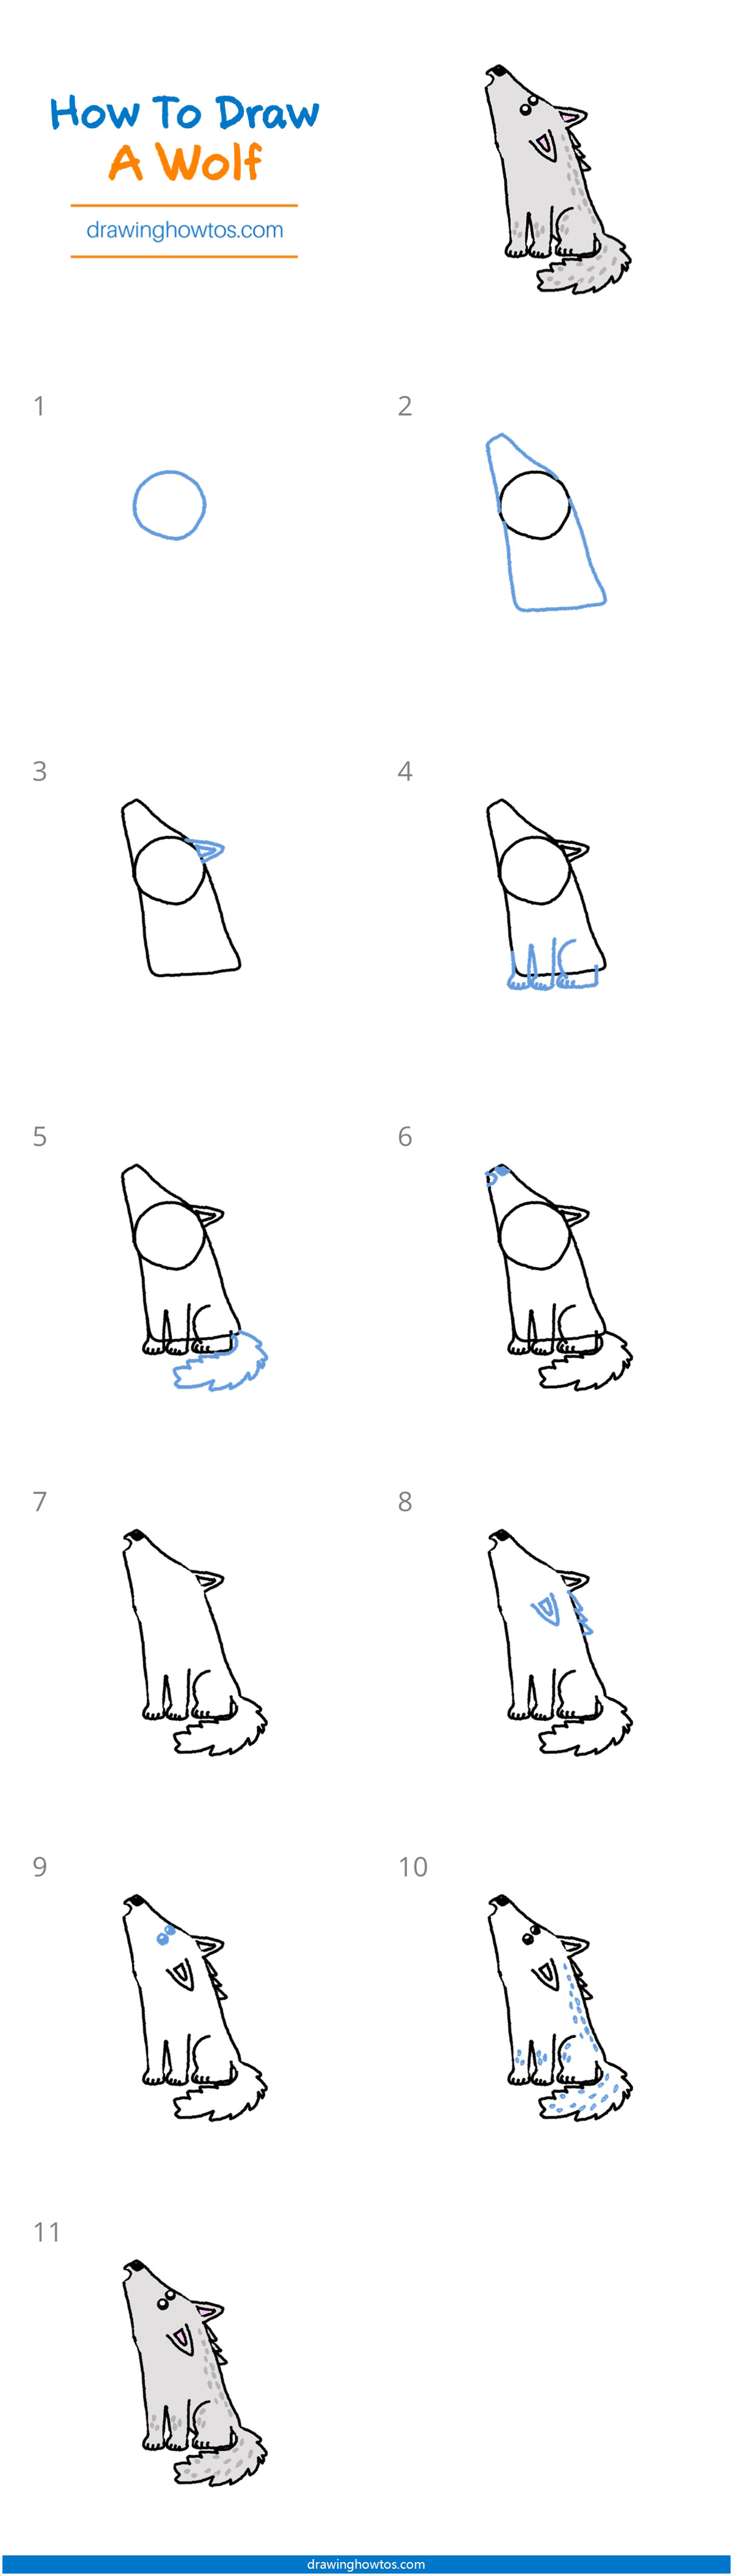 How to Draw a Wolf Step by Step